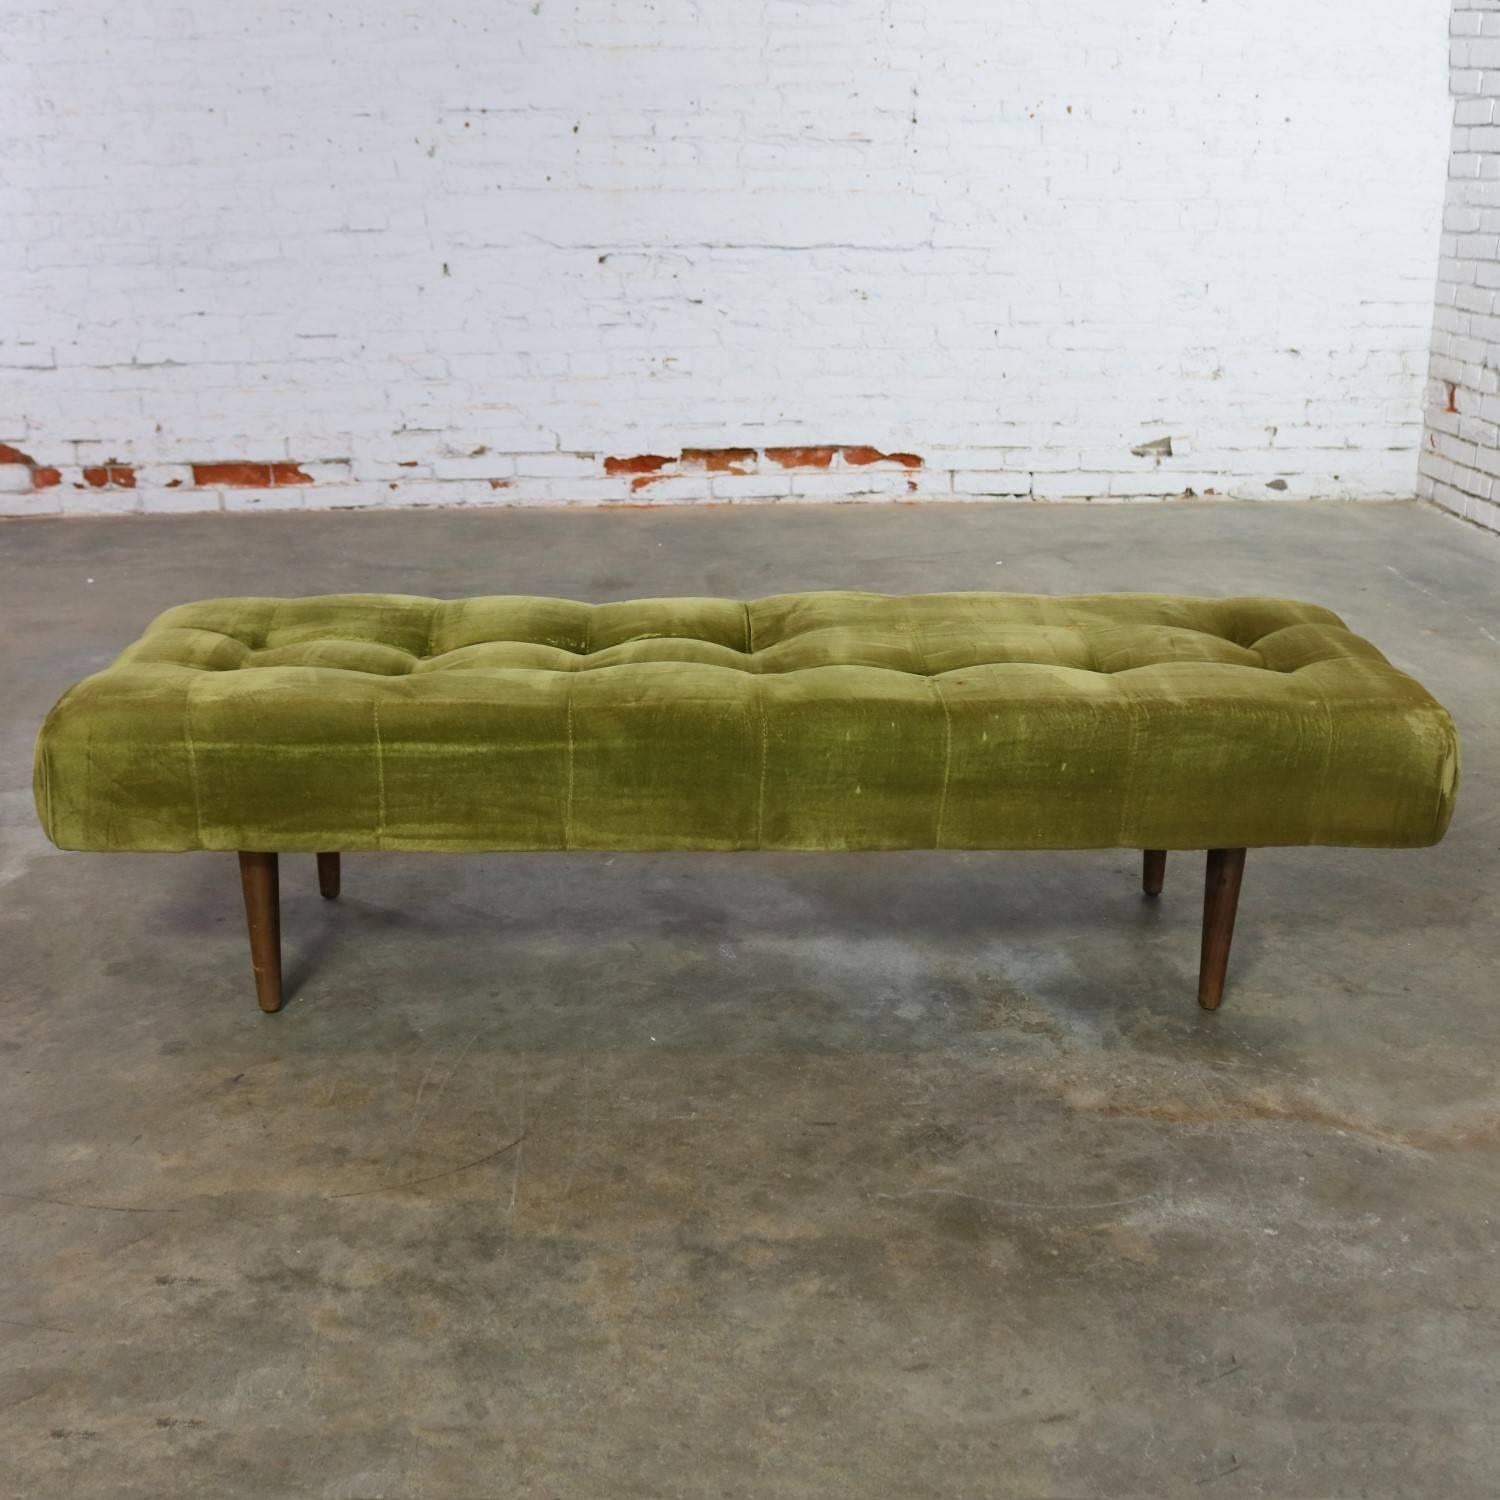 Interesting midcentury and/or Hollywood Regency upholstered and biscuit tufted bench. This piece still retains its original avocado green velvet upholstery and, if you like age patina, it could be used; however, there are a couple buttons missing